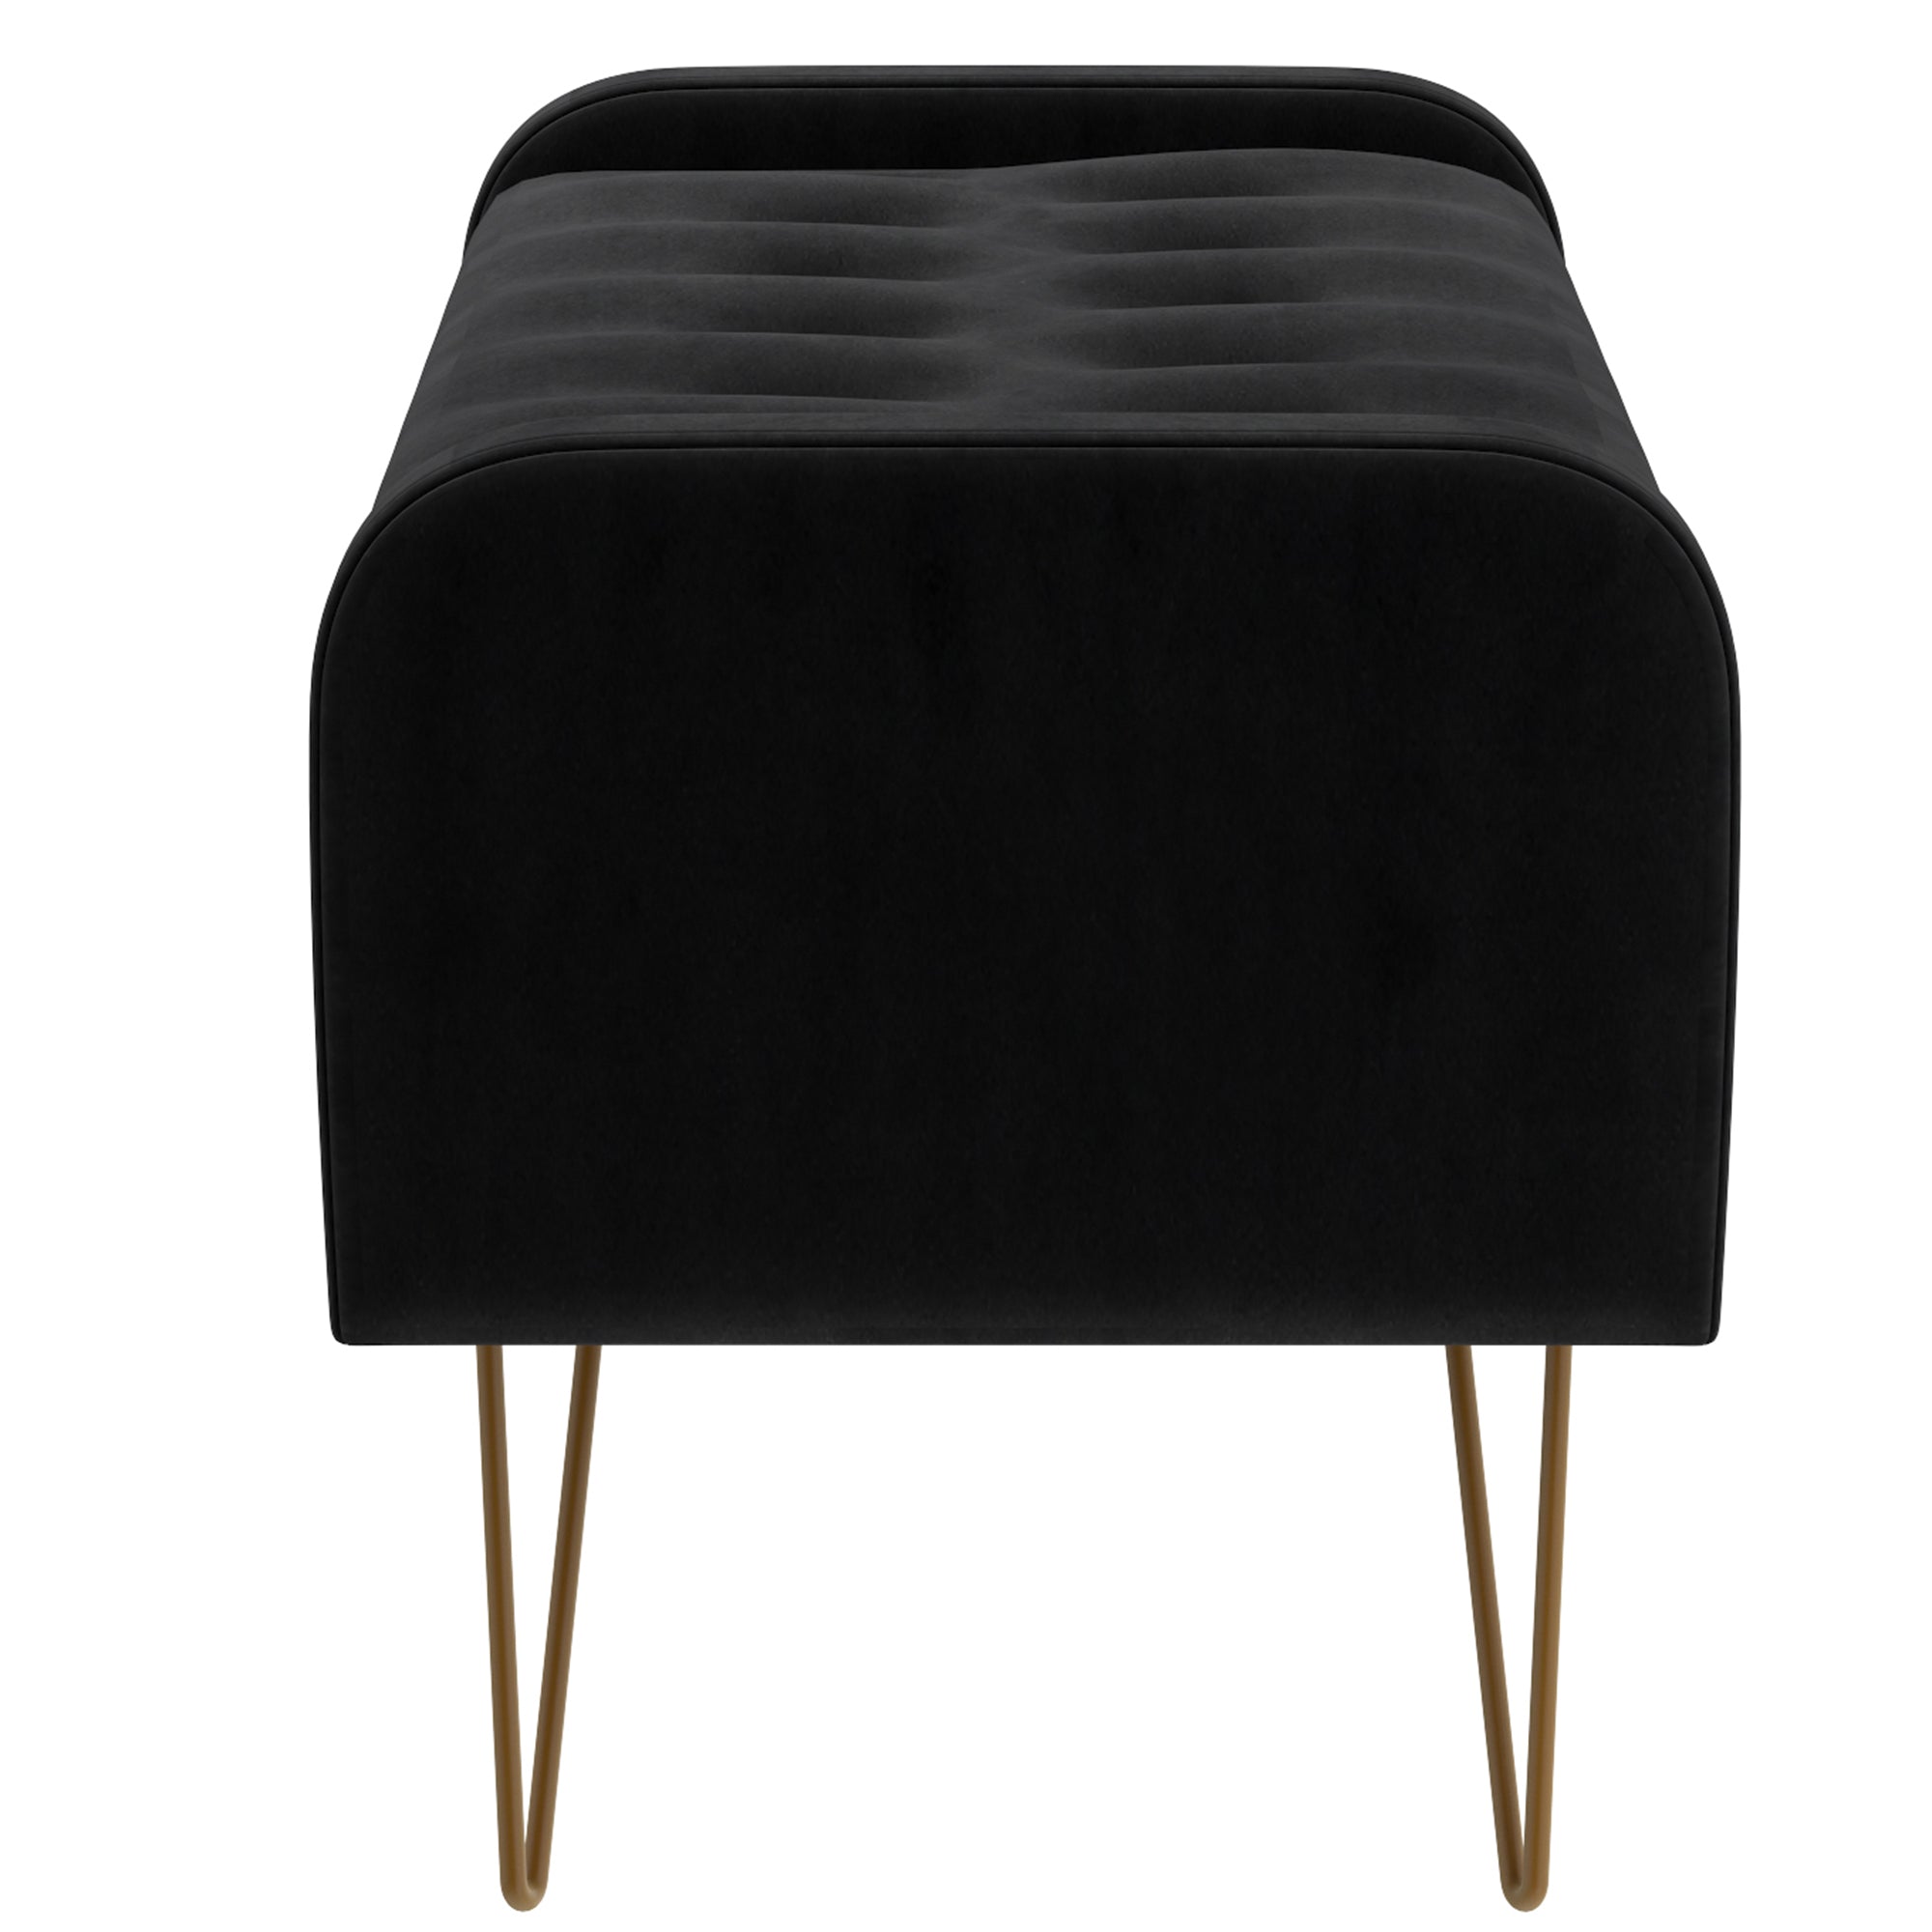 Sabel Storage Ottoman/Bench in Black and Aged Gold 402-549BLK/GL